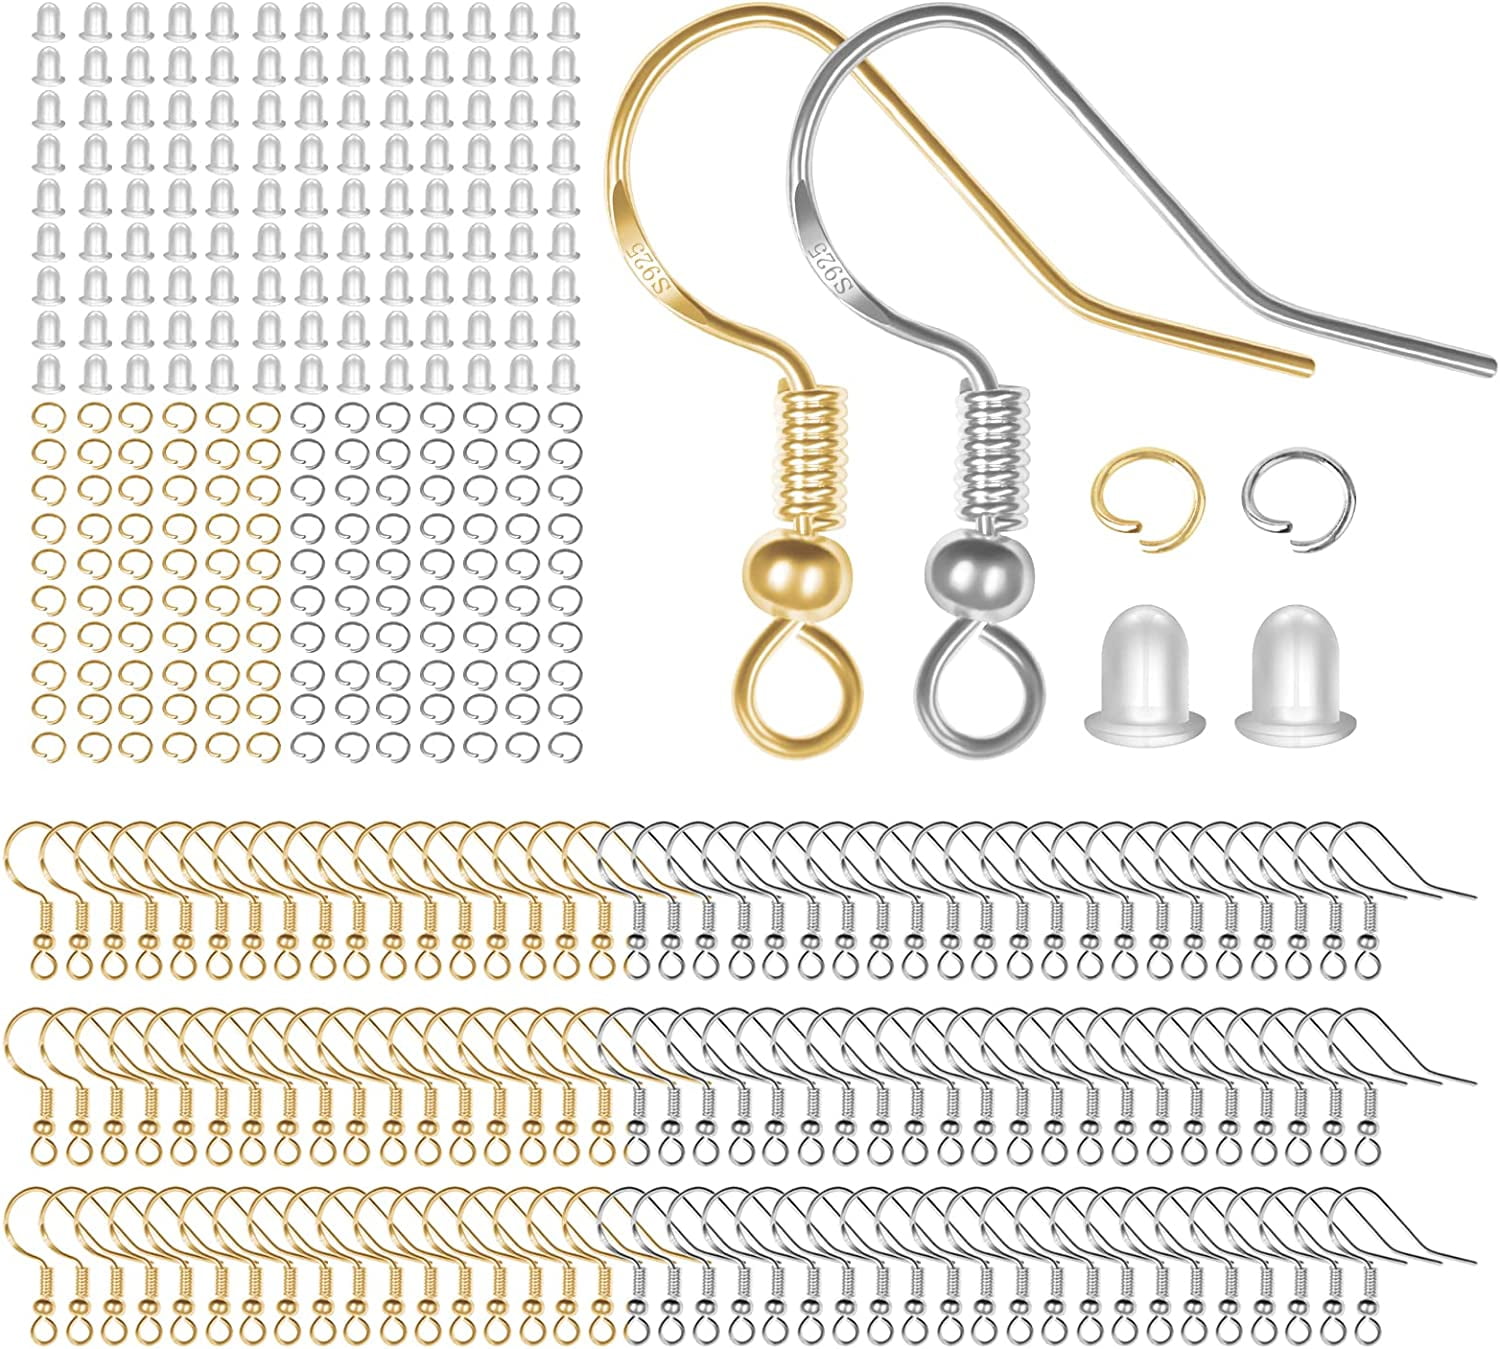 Celectigo 925 Sterling Silver Earring Hooks, 1000-pcs Ear Wire Fish Hooks Hypoallergenic Earring Making Kit with Clear Silicone Earring Backs Stoppers